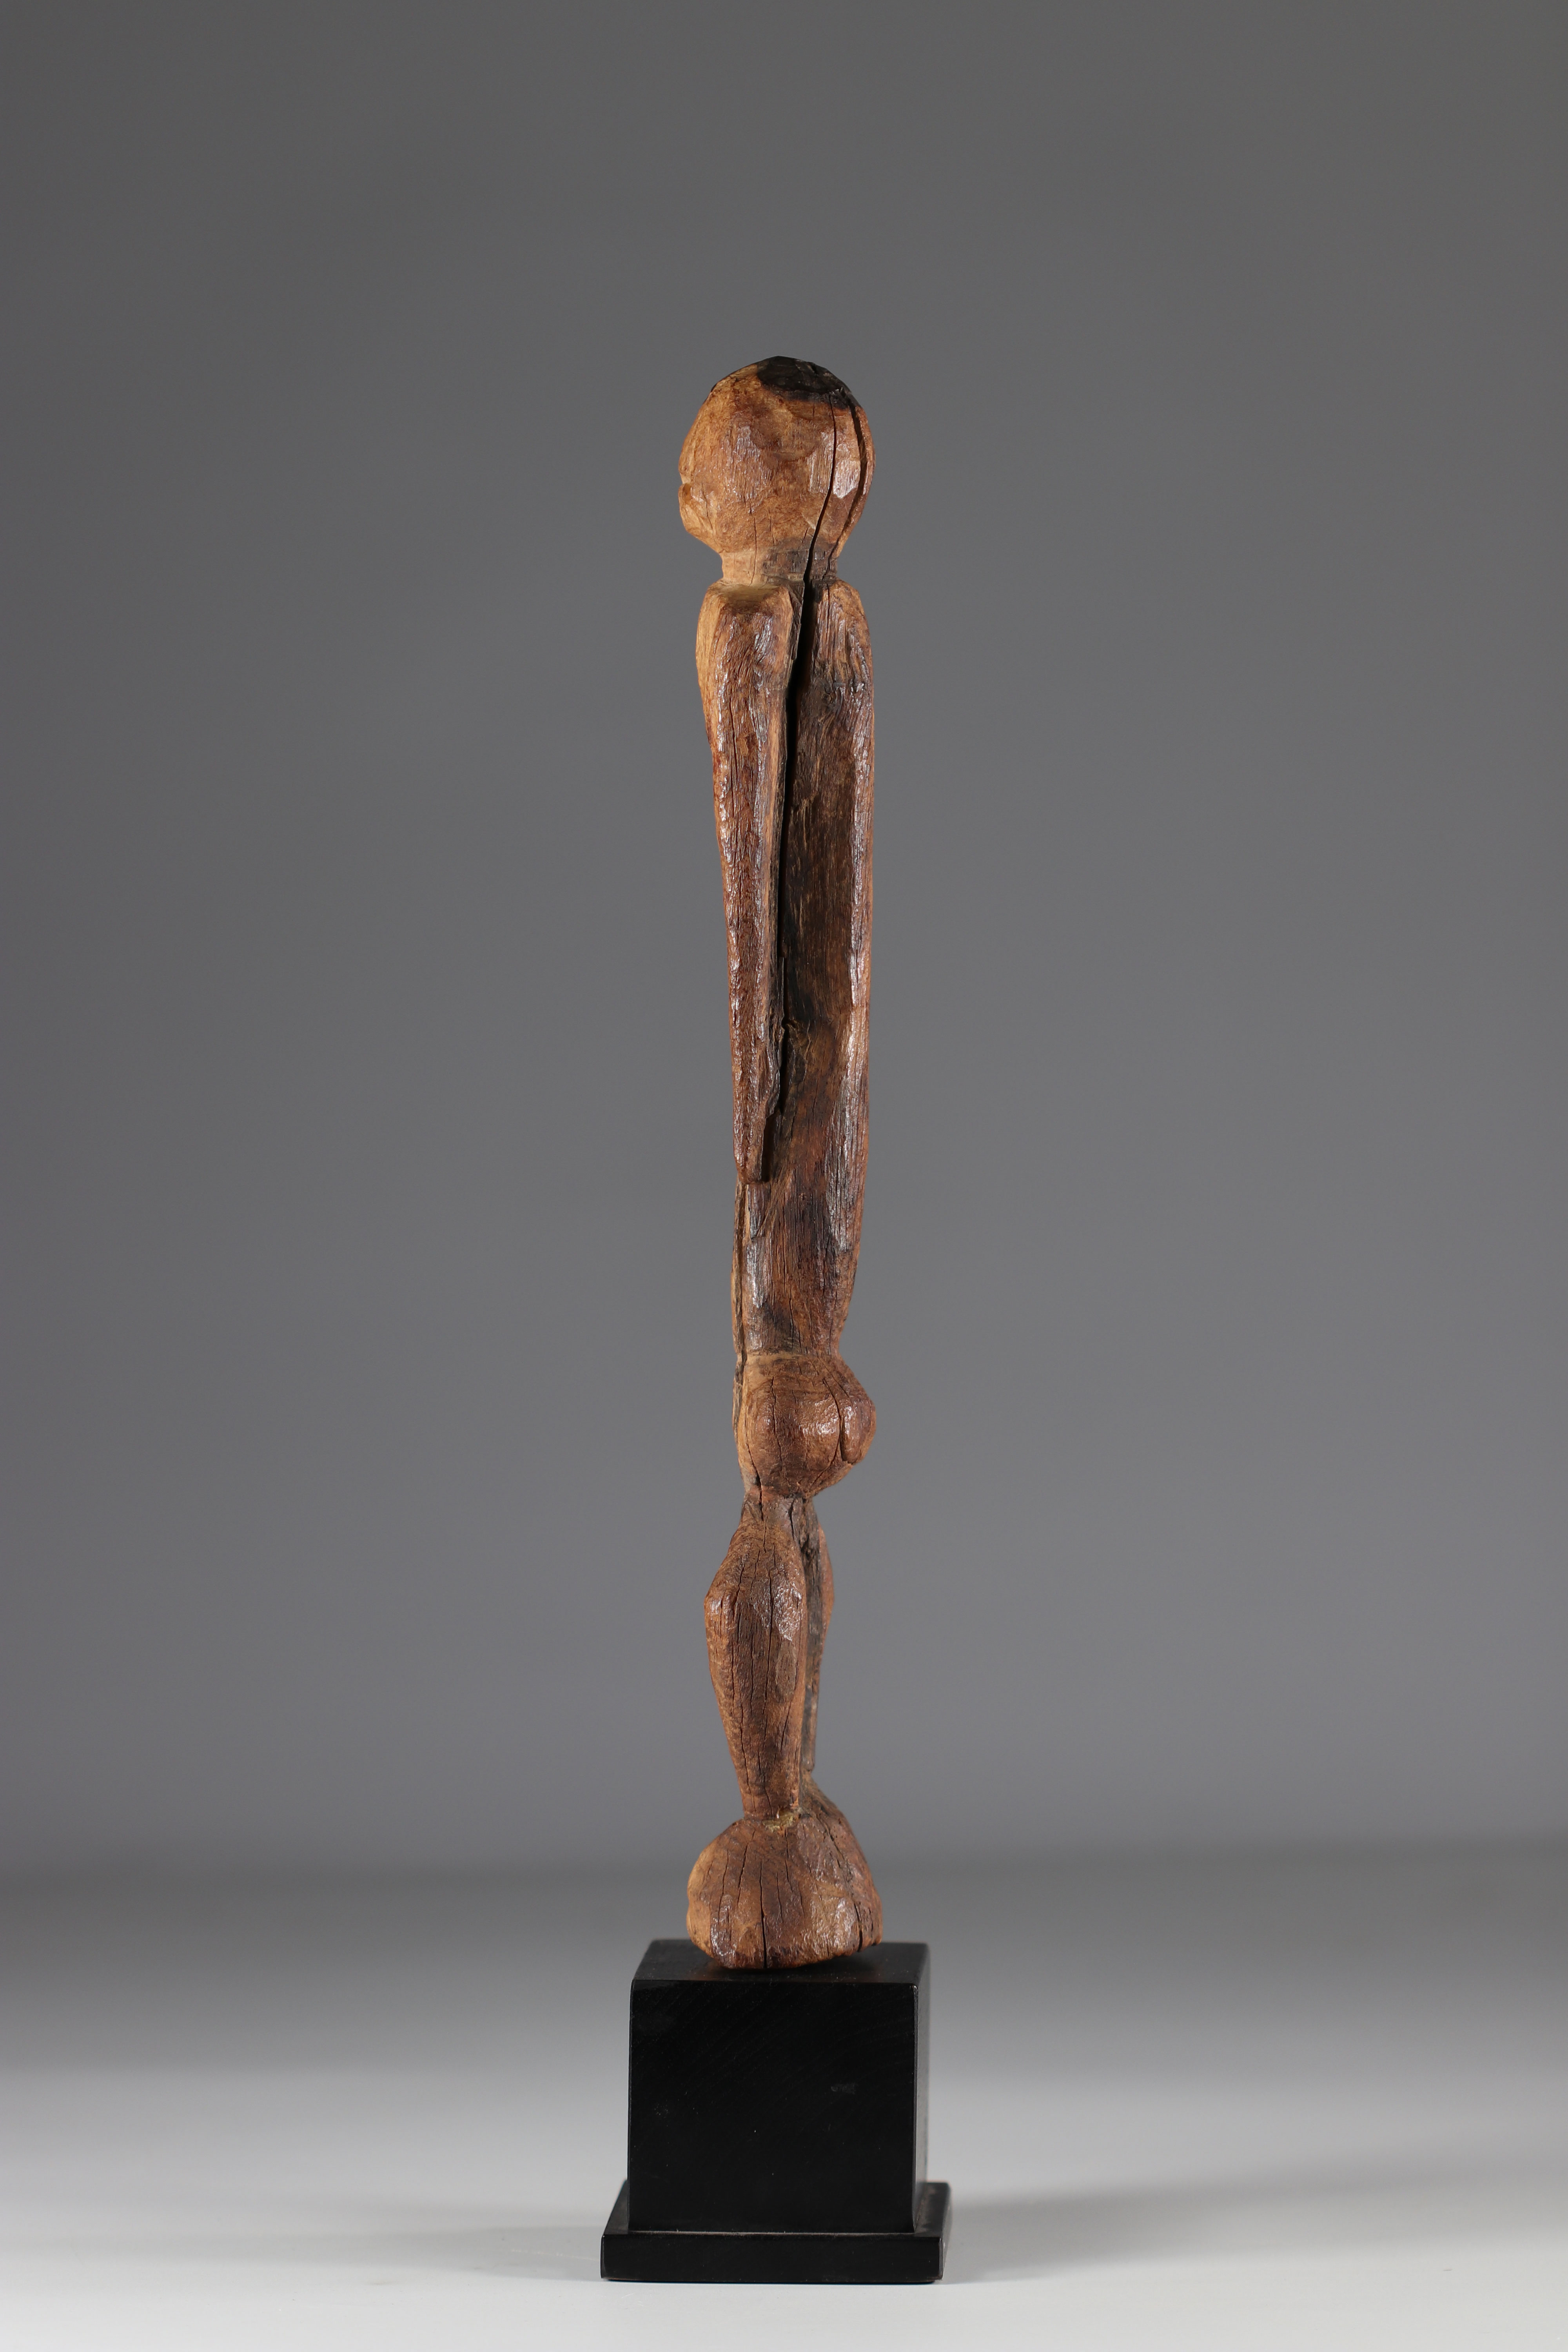 Dogon ancestor statue - early 20th century or earlier - Africa - Mali - Image 4 of 5